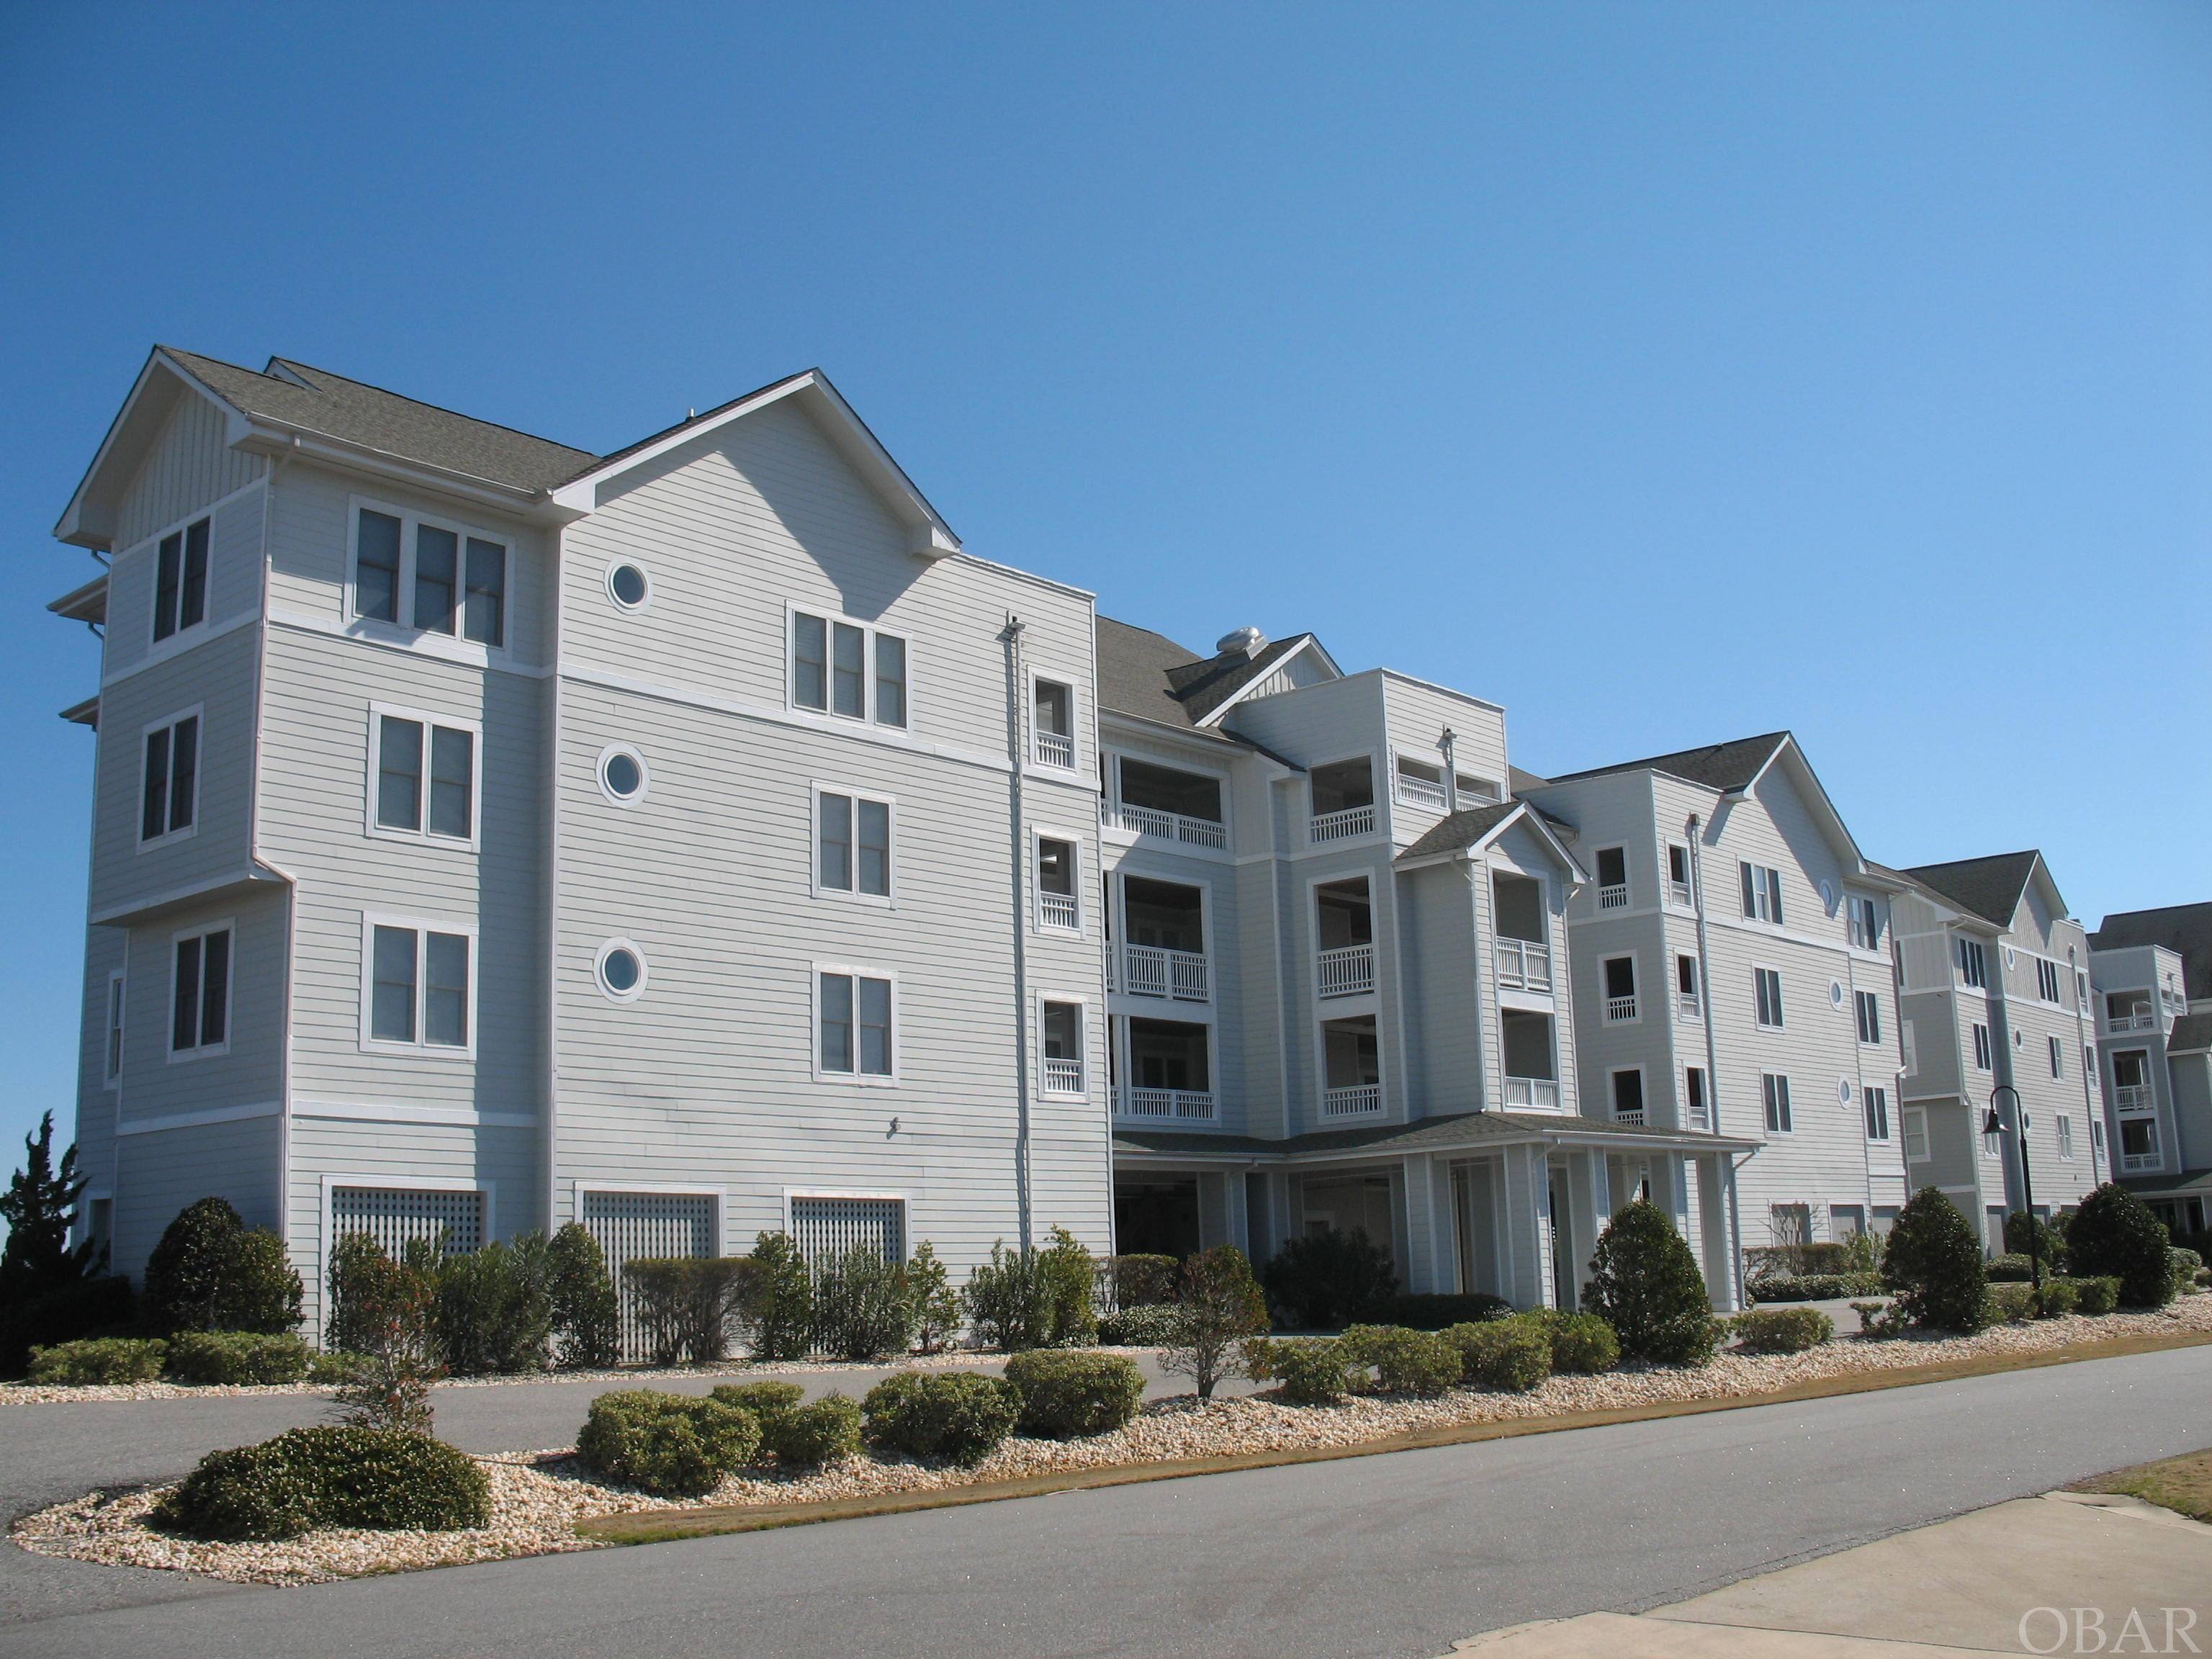 Enjoy the best of the best on the Outer Banks!  1950 sq ft,  4 bedroom, 3 full,  bath with a rental projection of $49,644.00. Current owners have enjoyed as a second home.  The only Soundfront end unit in Ballast Point Villas, Pirates Cove.  This beautiful condominium features two master suites, two guest bedrooms and three full baths.  A wrap around deck to enjoy sunrises and twinkling lights of Nags Head at night.  ELEVATOR building.  Covered assigned parking and a ground level storage unit. Pirates Cove is a 24/7 gated, golf cart friendly community with a Clubhouse with pool and snack bar, owners pool, fitness center, tennis cts, playground and miles of lighted docks.  Adjacent restaurant, ships store, tiki bar and full service marina.  Only minutes to the nearest beach access or about 25 minutes to Oregon Inlet by boat.  Four bedroom soundfront condo's do not come available too often and this one is sure not last long.   Call the listing Agent to schedule your appointment or call for more details.